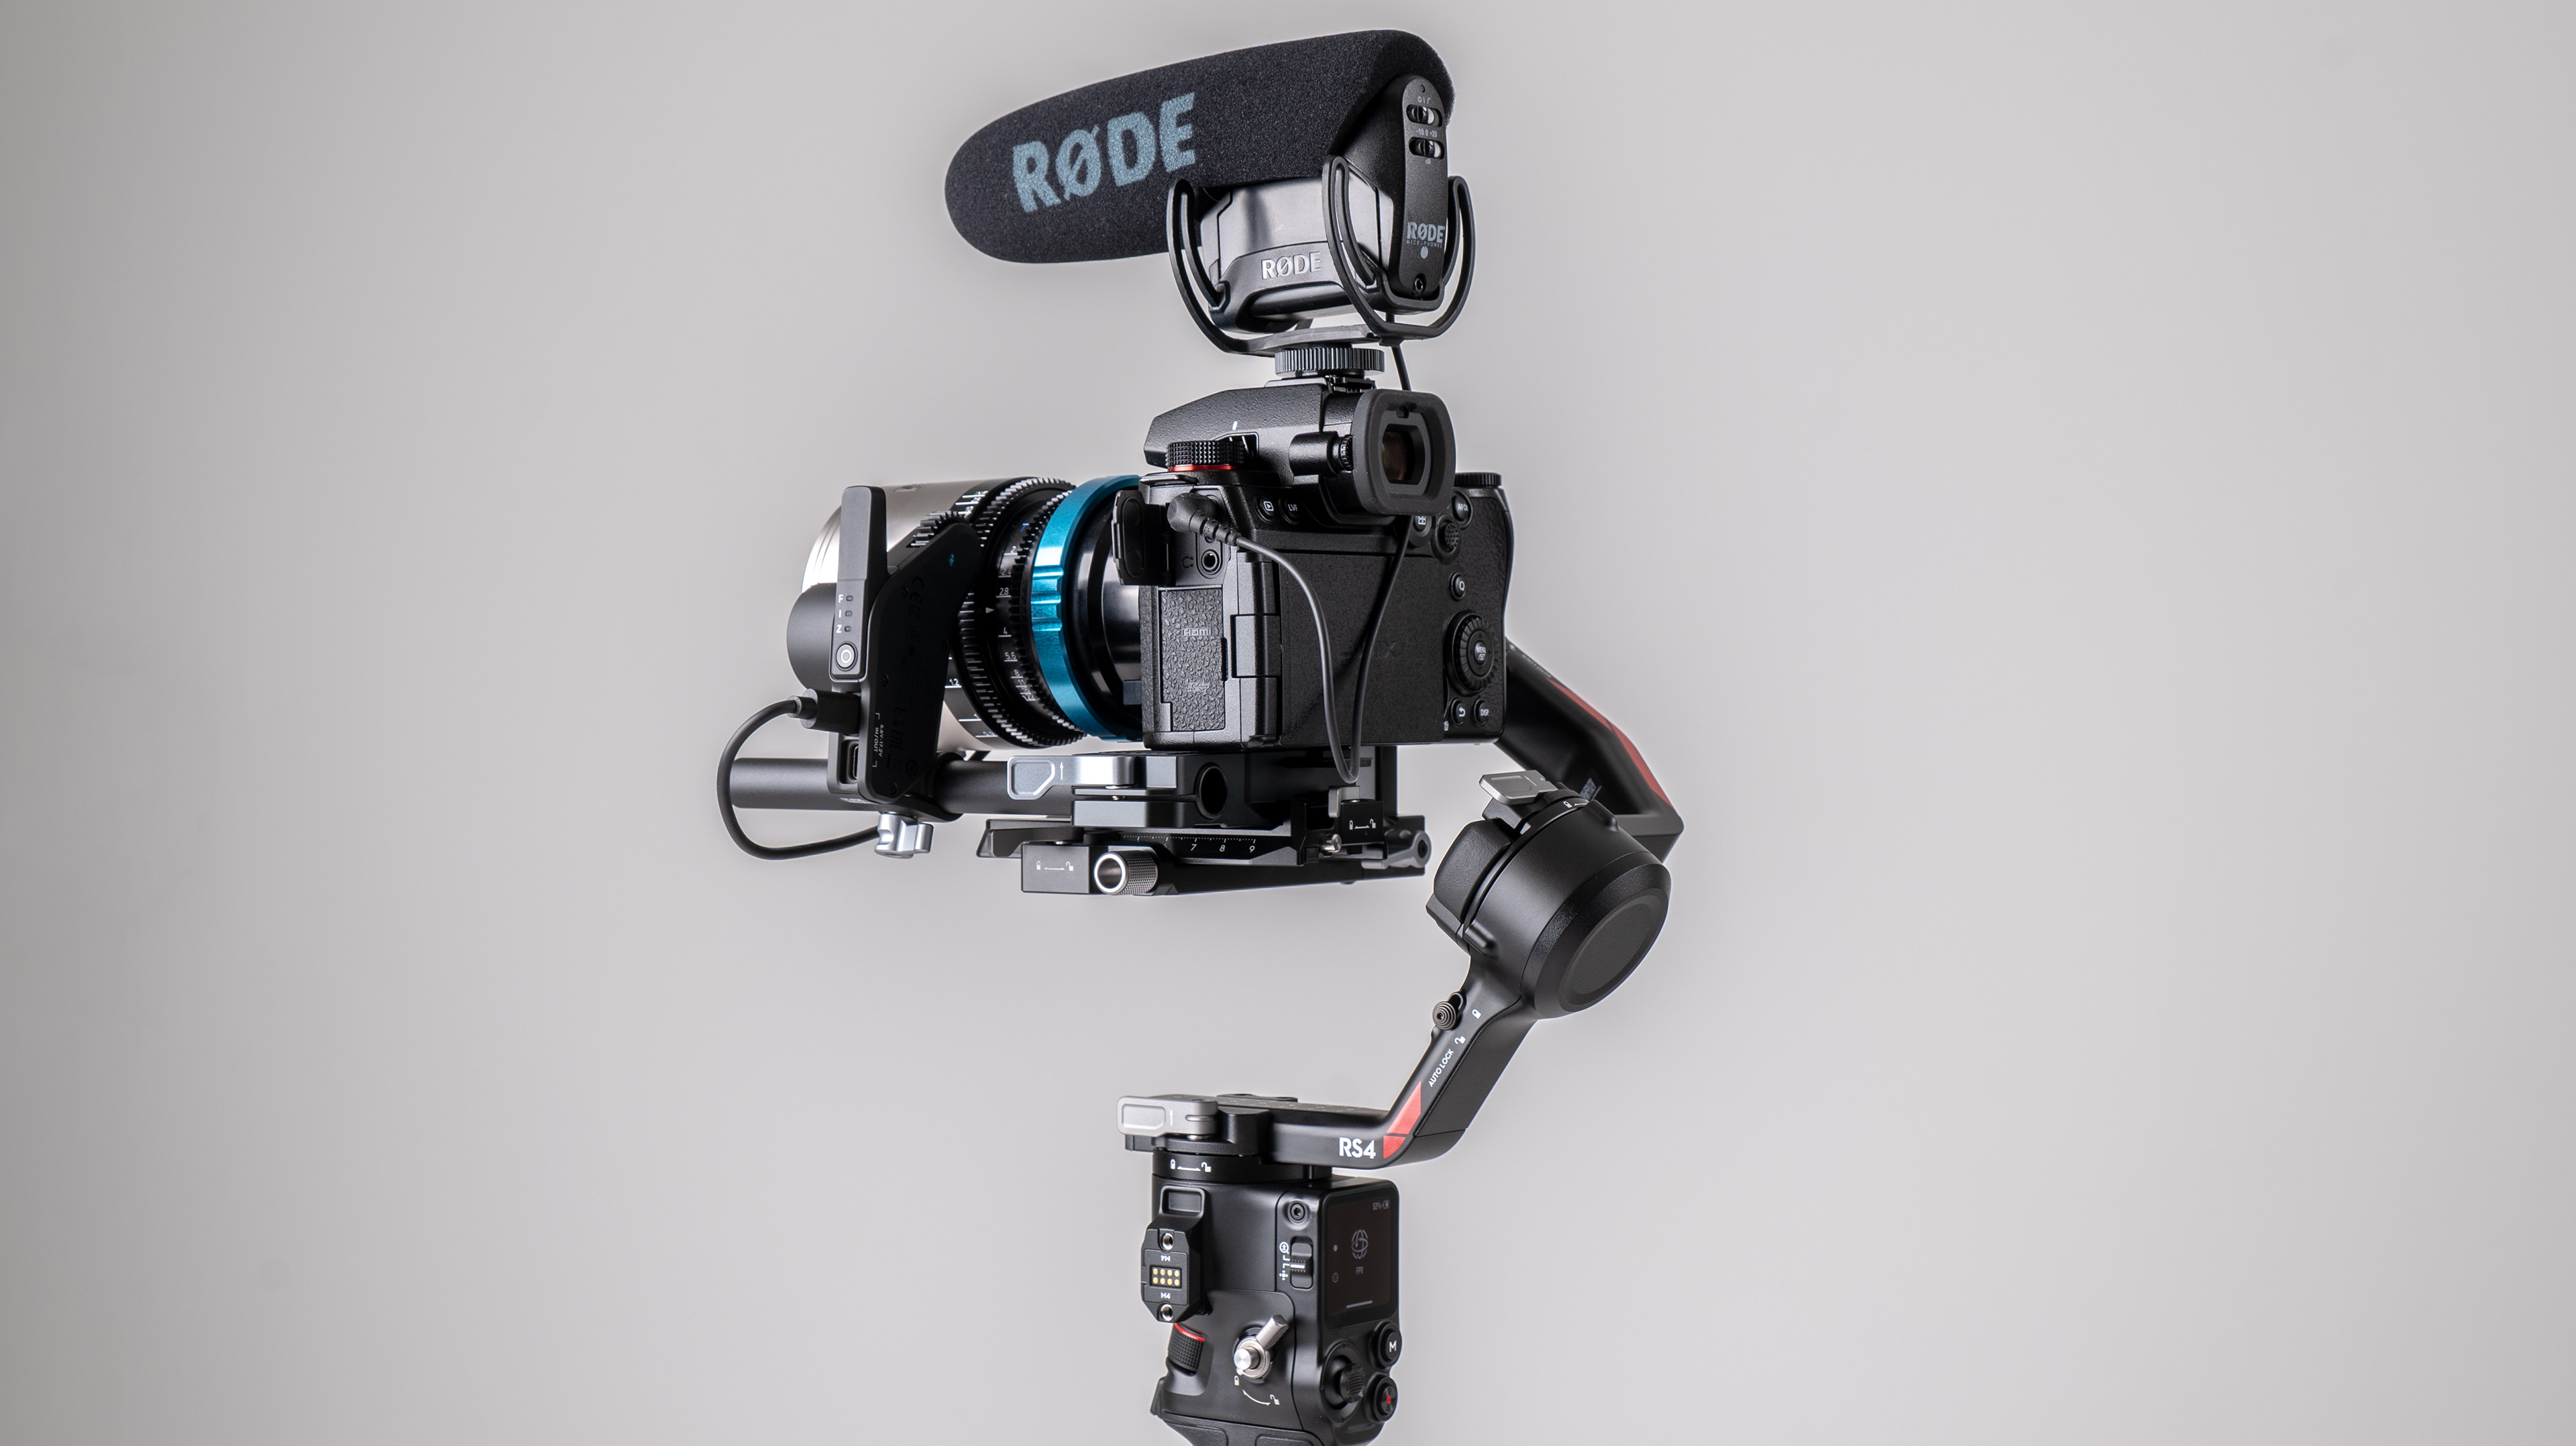 DJI RS 4 gimbal with Focus Pro system and Panasonic mirrorless camera on a off-white background